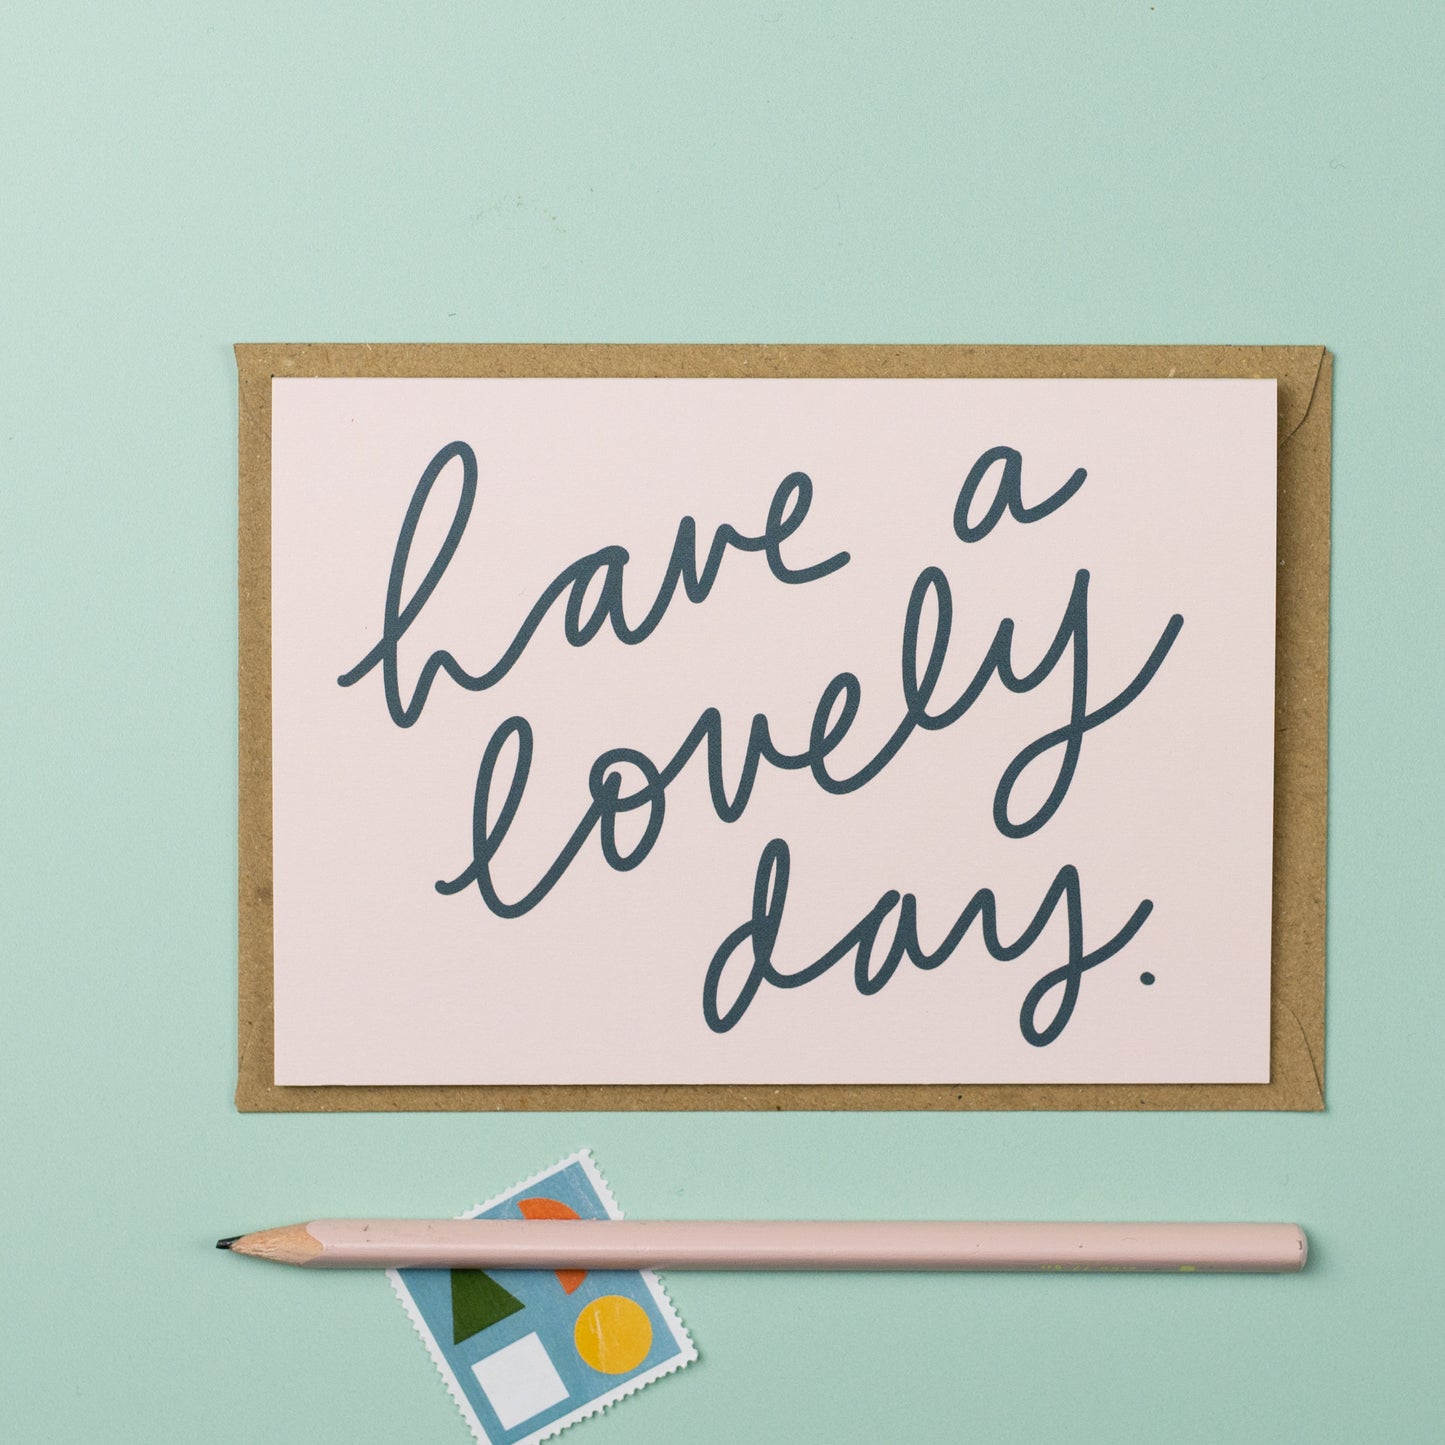 Have a lovely day card